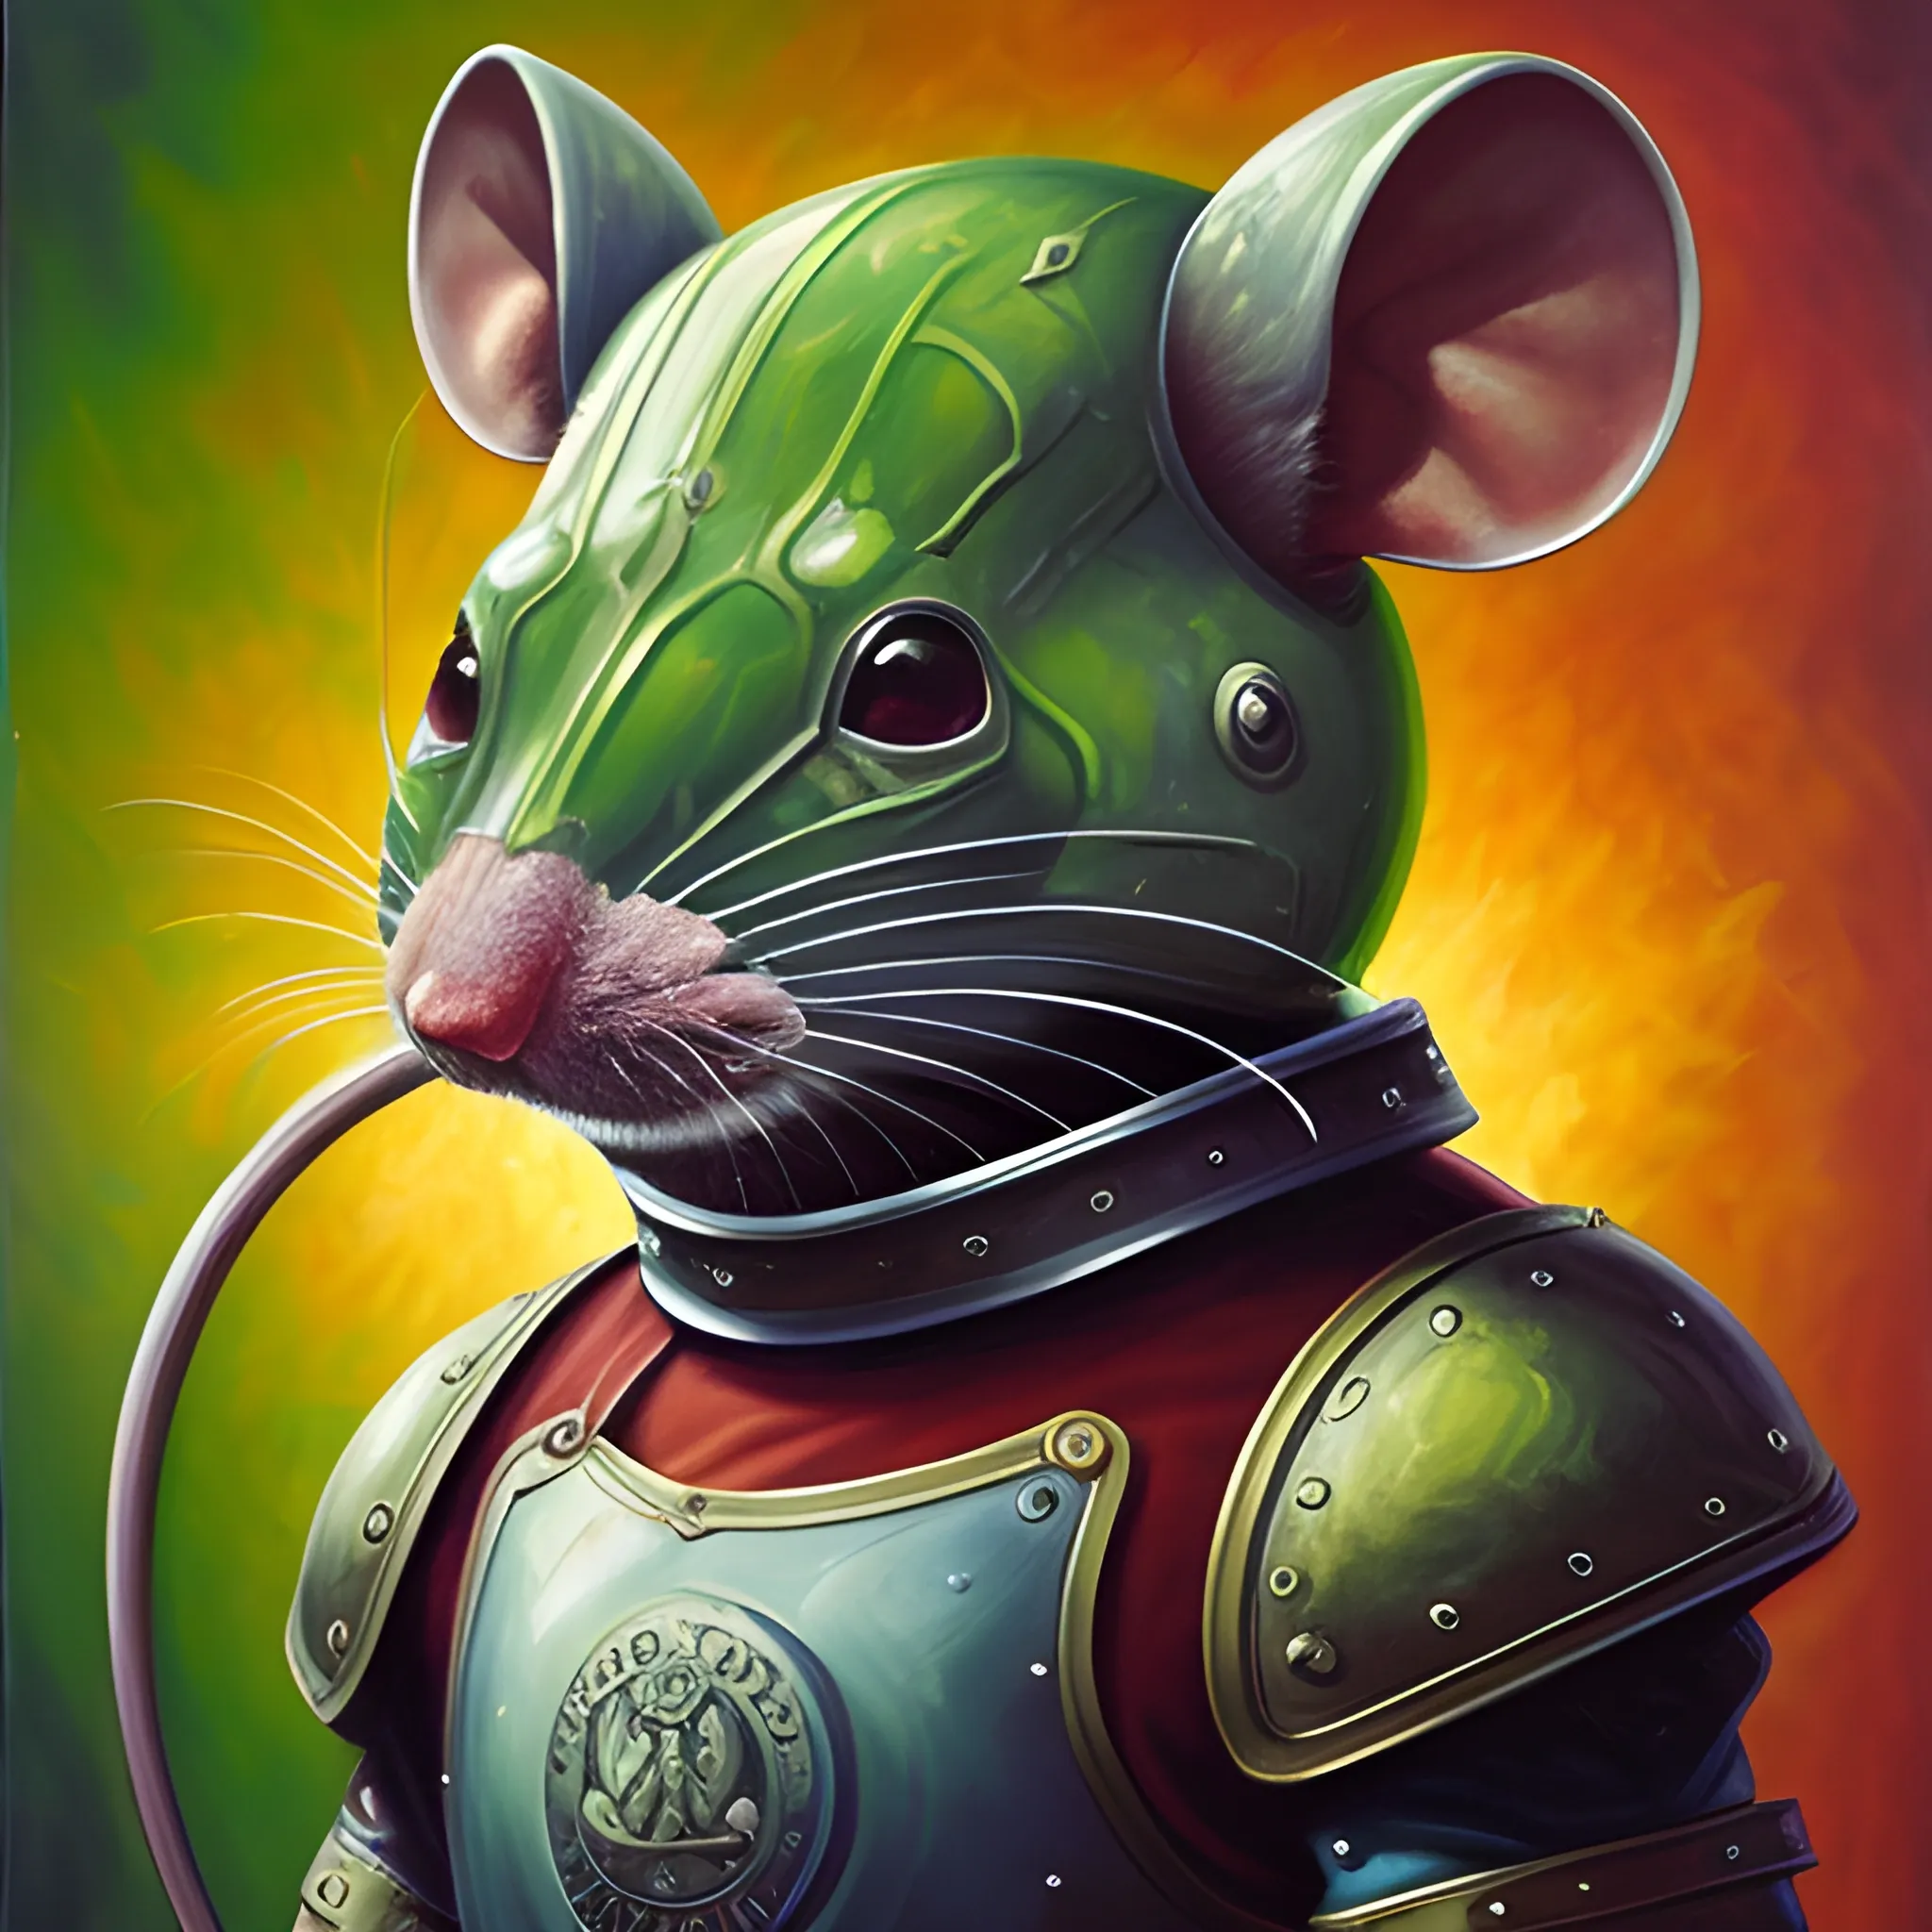 General Mouse is wearing armor. , Oil Painting, Trippy，Just like the Hulk